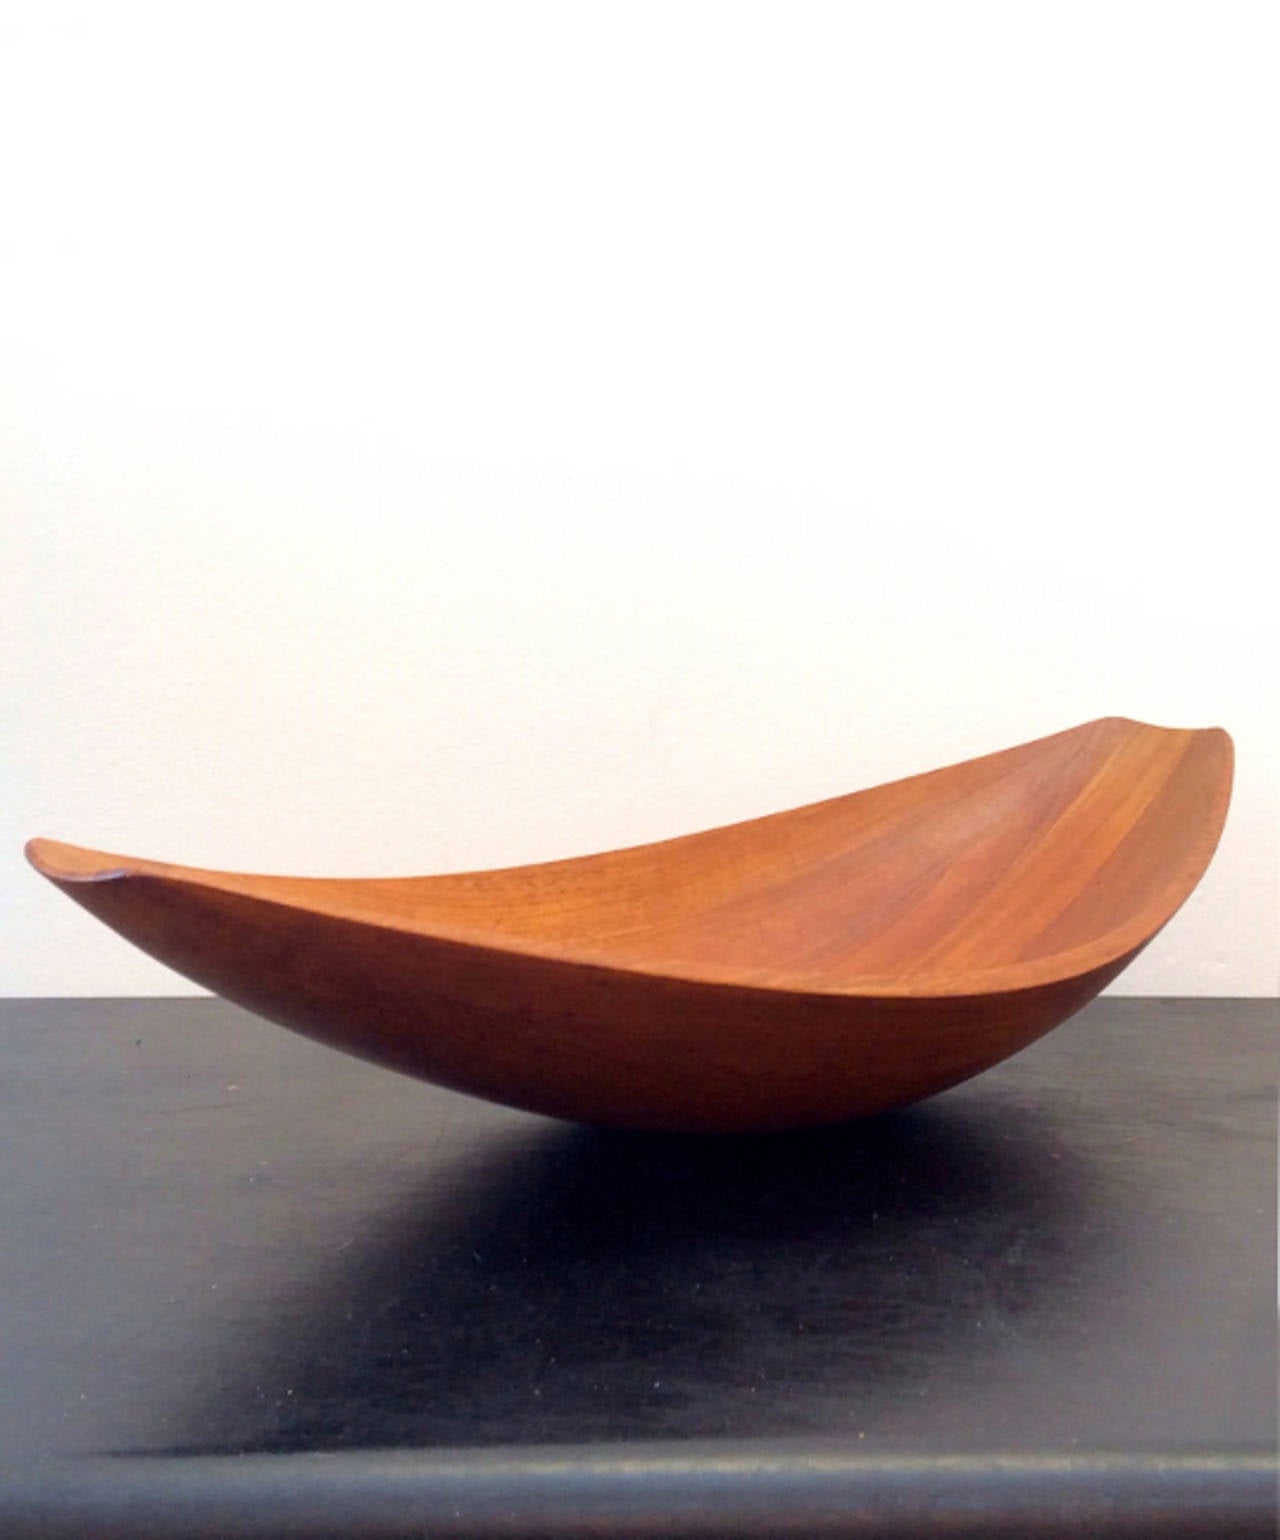 Staved solid teak canoe-shaped fruit bowl by Jens Quistgaard for Dansk.  Denmark 1960s.

Elegant design in very nice original condition, with good patina and 